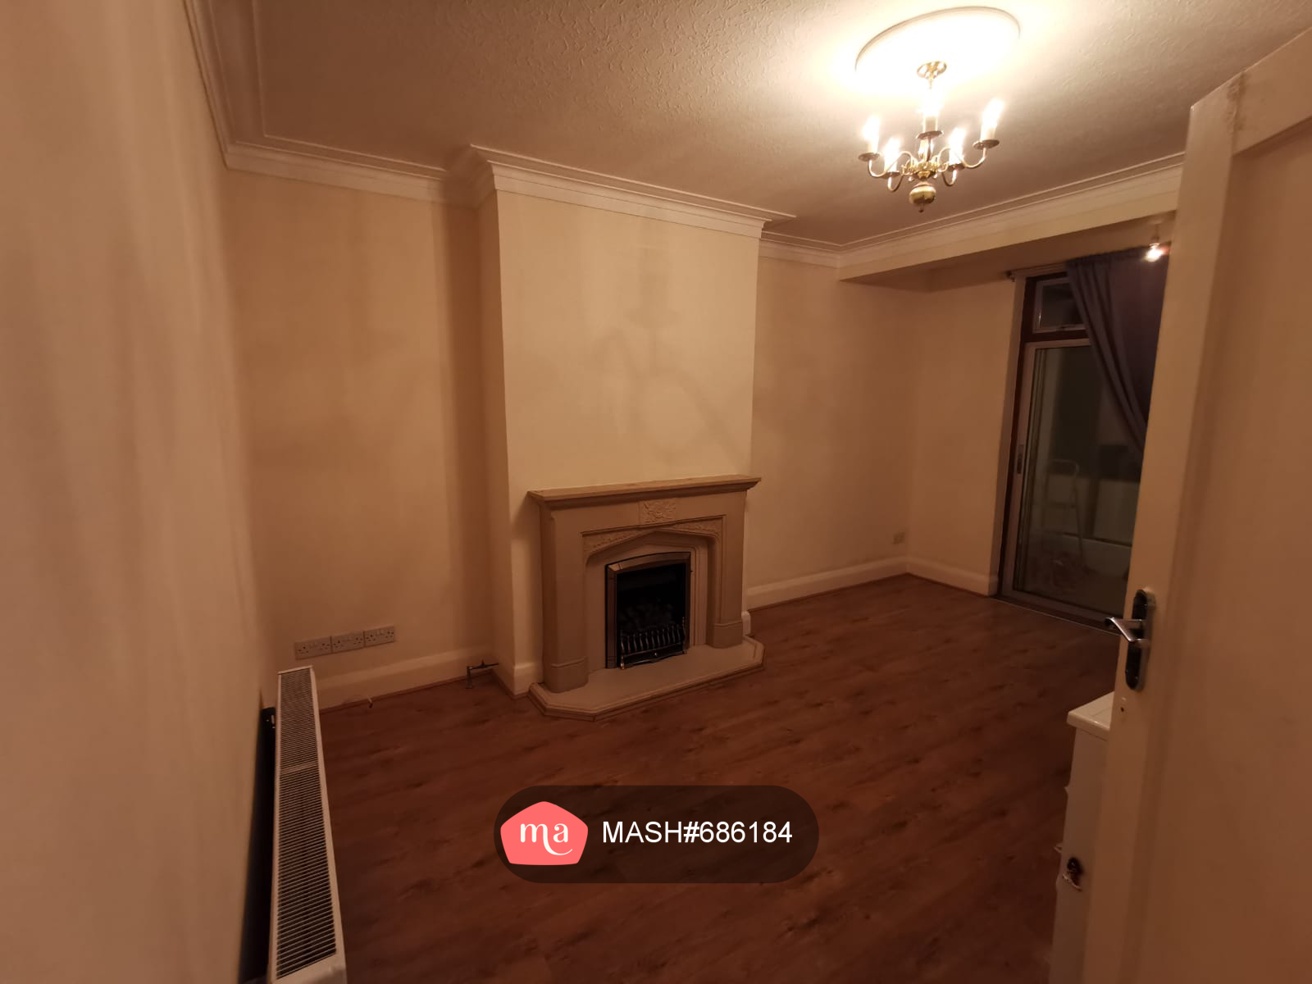 3 Bedroom Semi-detached to rent in Ilford - Mashroom